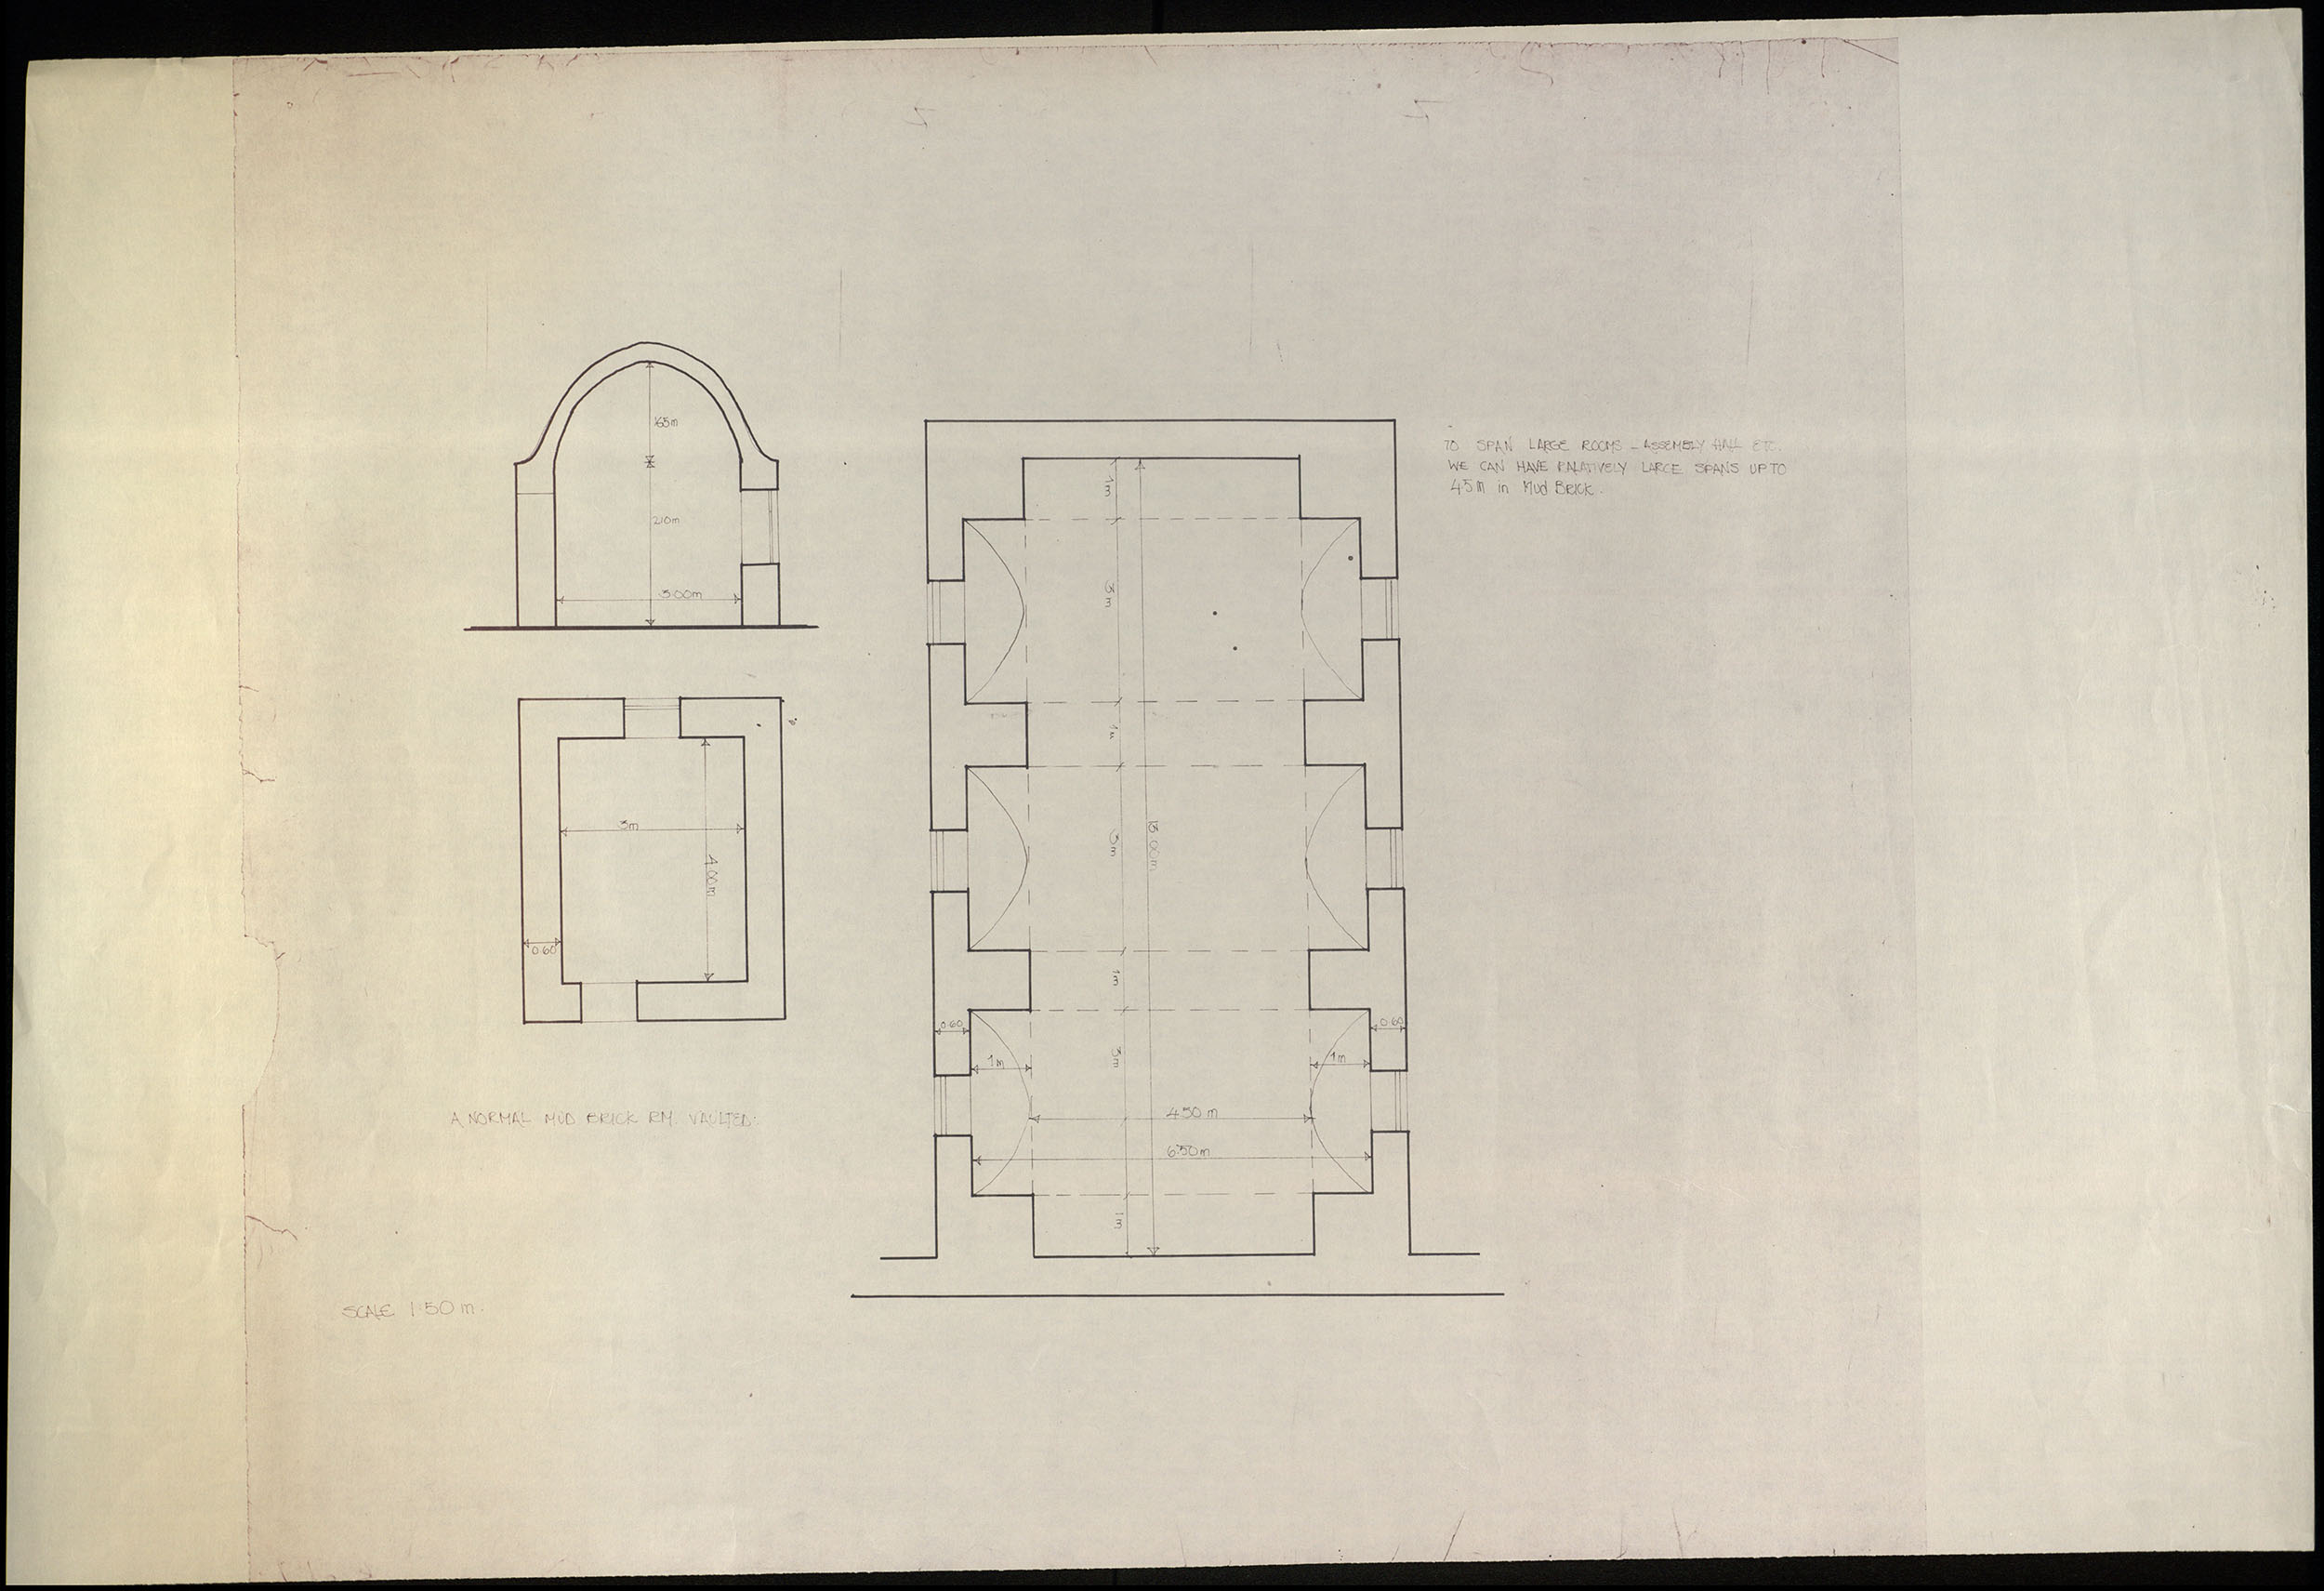 Hassan Fathy - Unidentified drawings of mud brick vaults - "normal mud brick room" and "large rooms, assembly halls, etc."